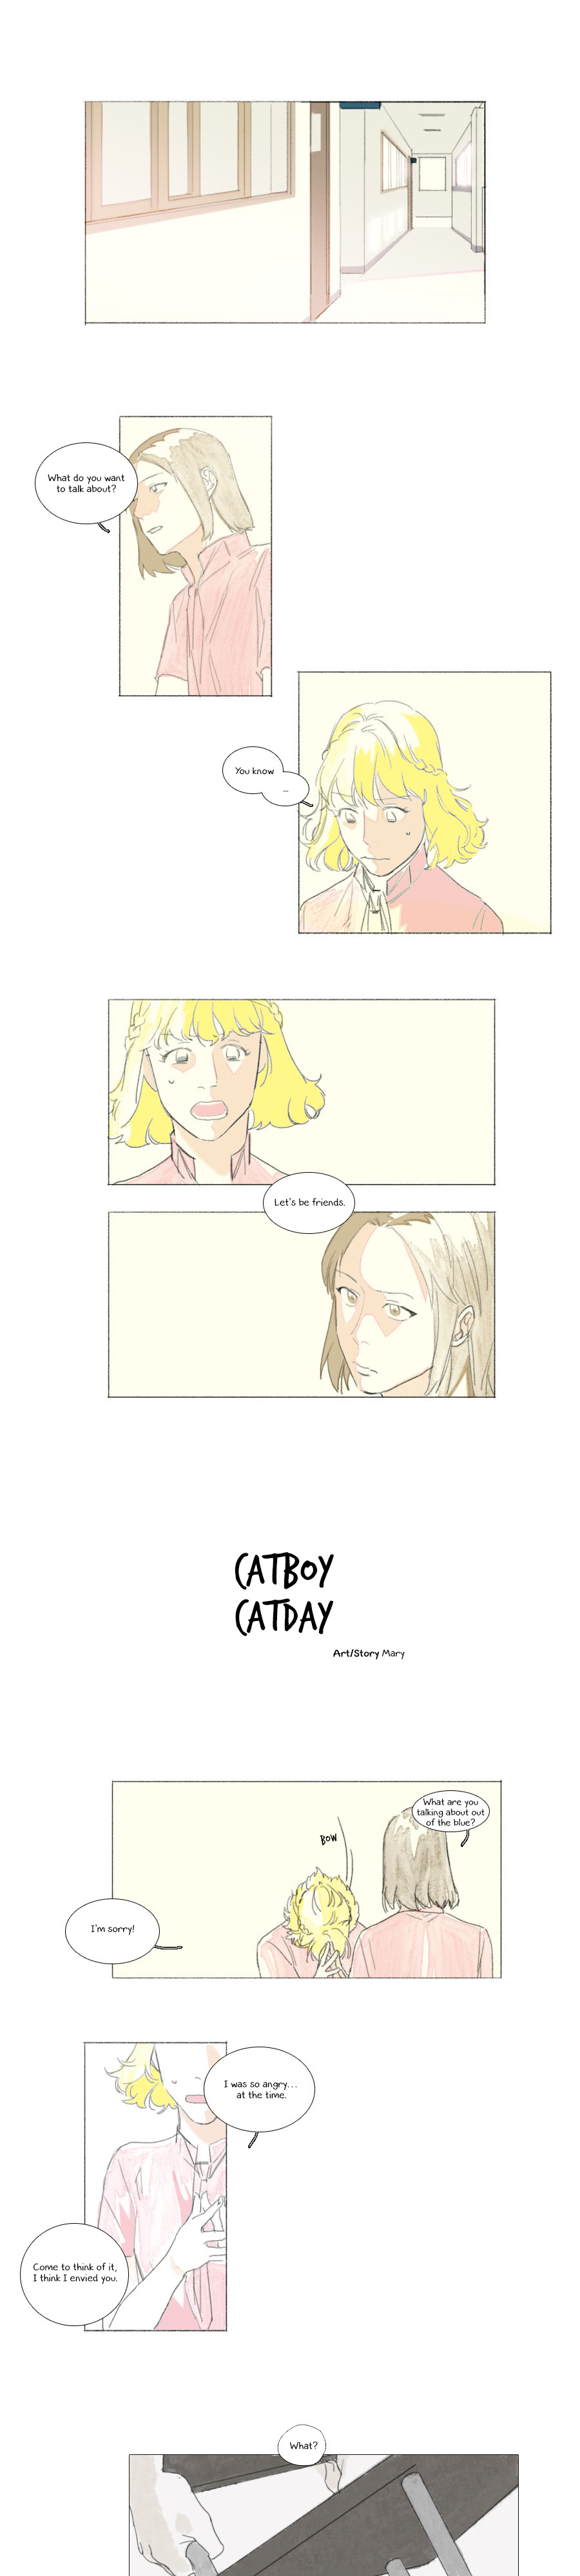 Catboy Catday Ch. 41 Apologize